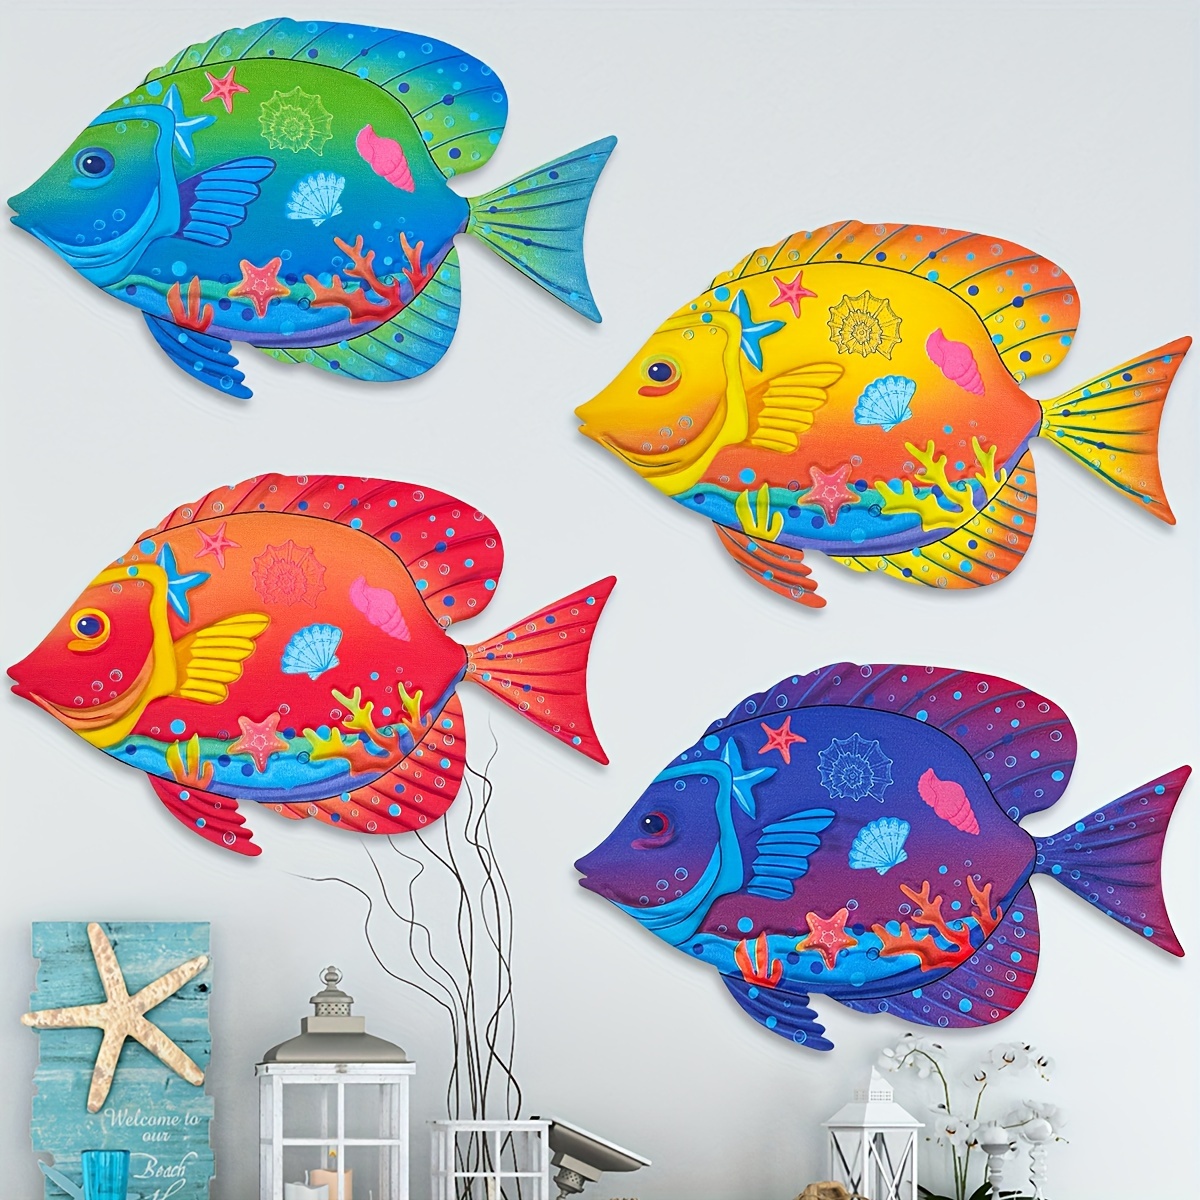 

4-piece Metal Fish Wall Art Decor - Indoor & Outdoor Iron Fish Sculpture Wall Decorations For Yard, Fence, Pool, Patio, Housewarming Gift For Parents And Friends